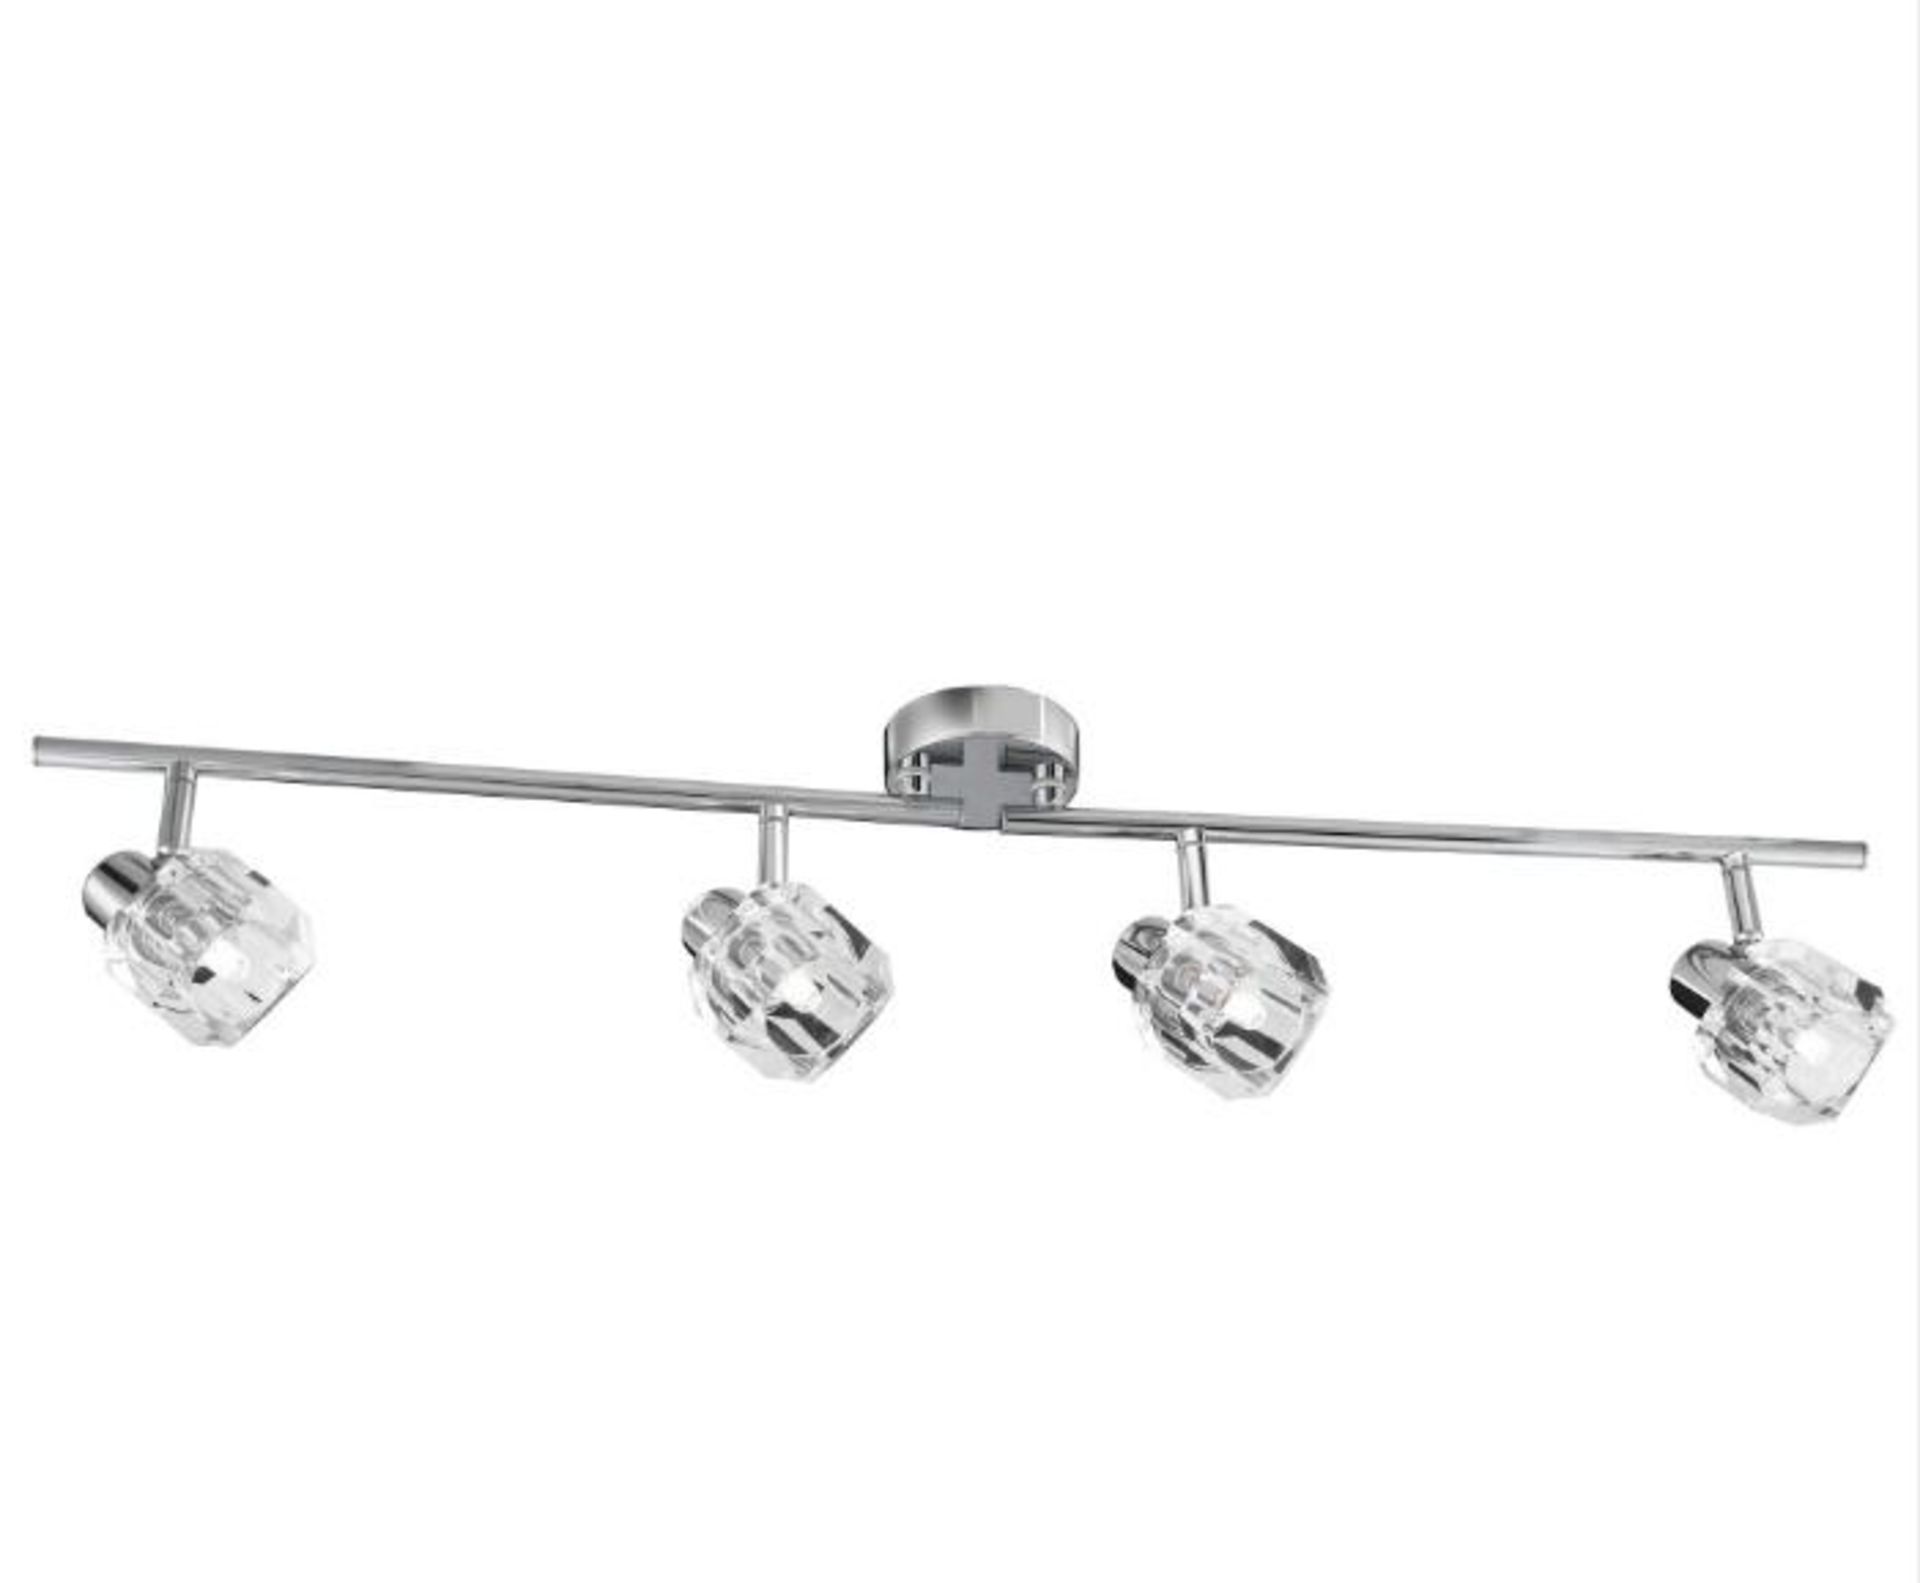 1 x Triton Chrome 4 Light Adjustable Bar Spotlight With Clear Glass Shades - Brand New Boxed Stock -